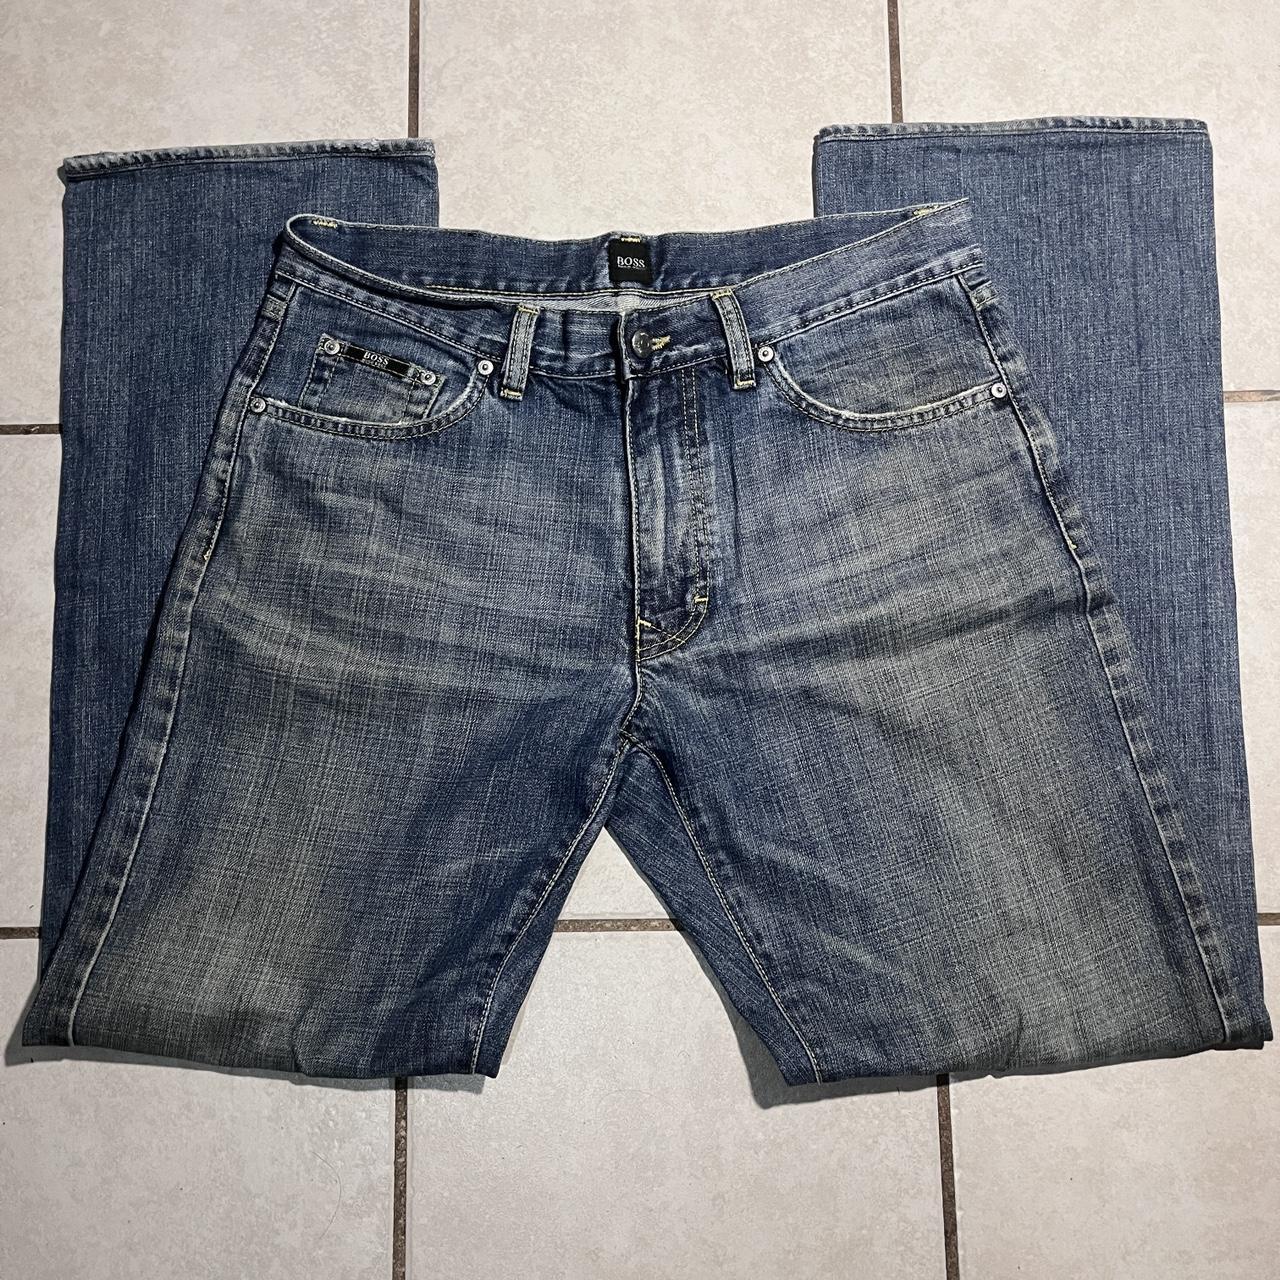 BAGGY but not too baggy hugo boss jeans with nice... - Depop